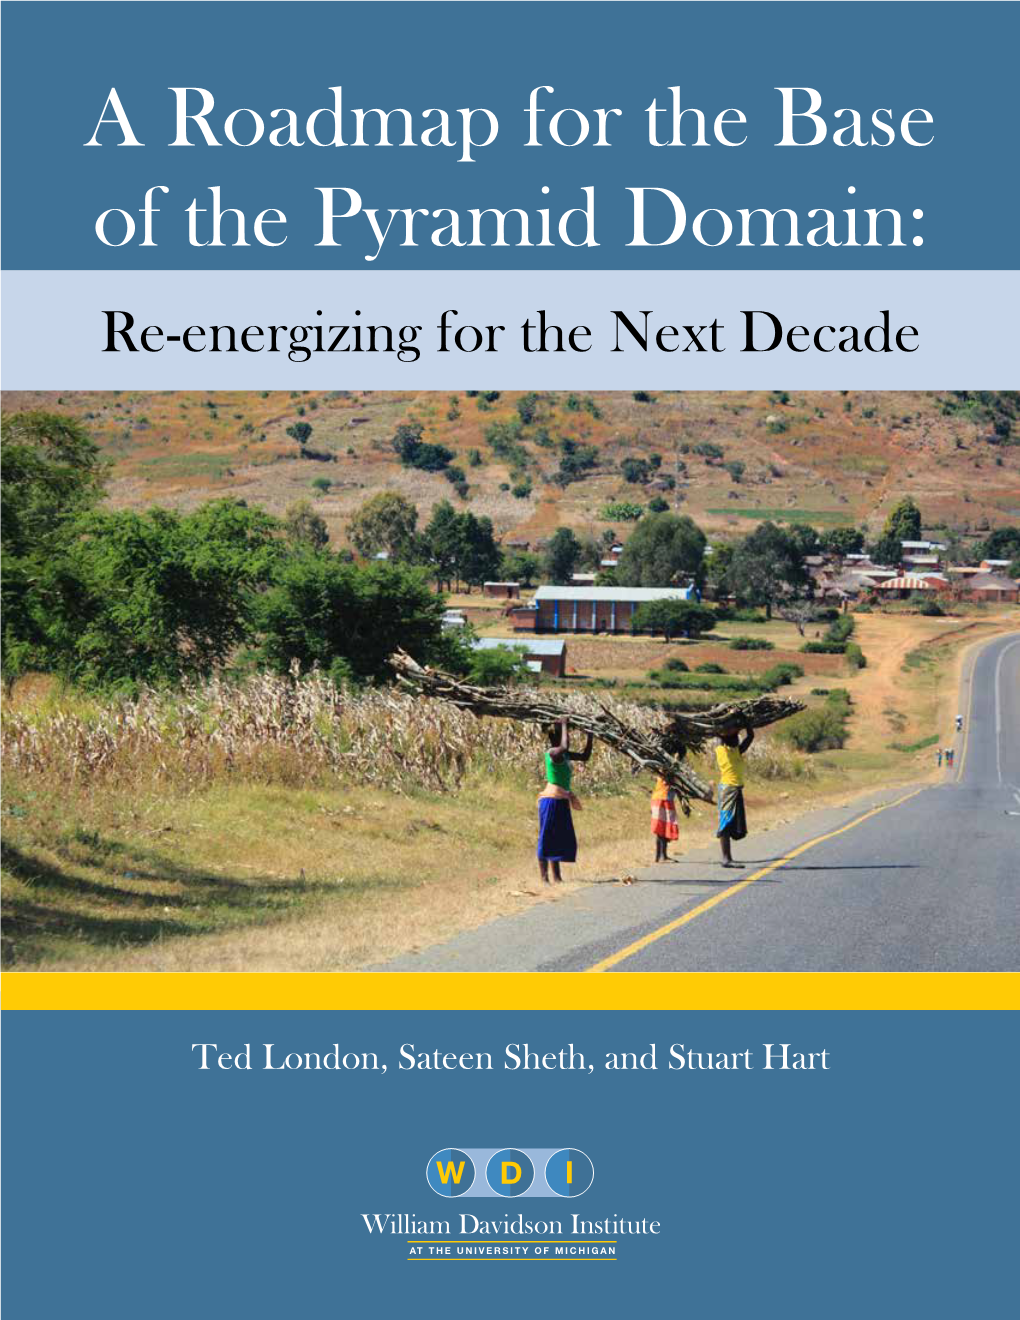 A Roadmap for the Base of the Pyramid Domain: Re-Energizing for the Next Decade